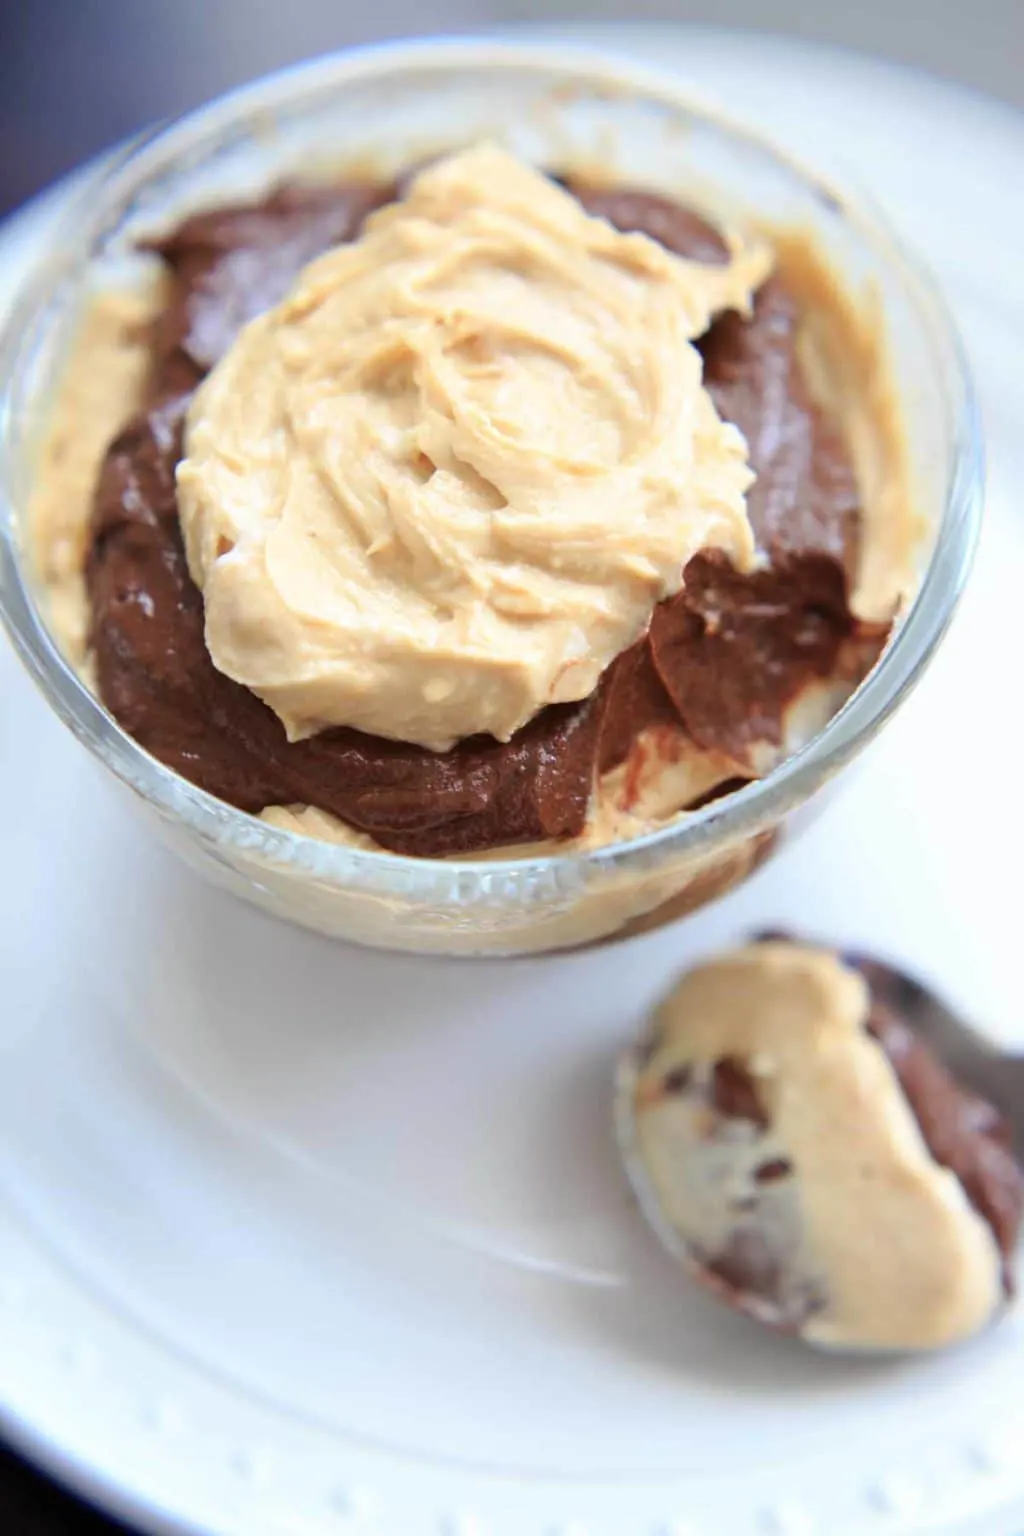 Vegan Chocolate Peanut Butter Mousse in dessert bowl, with spoonful resting next to it on white plate